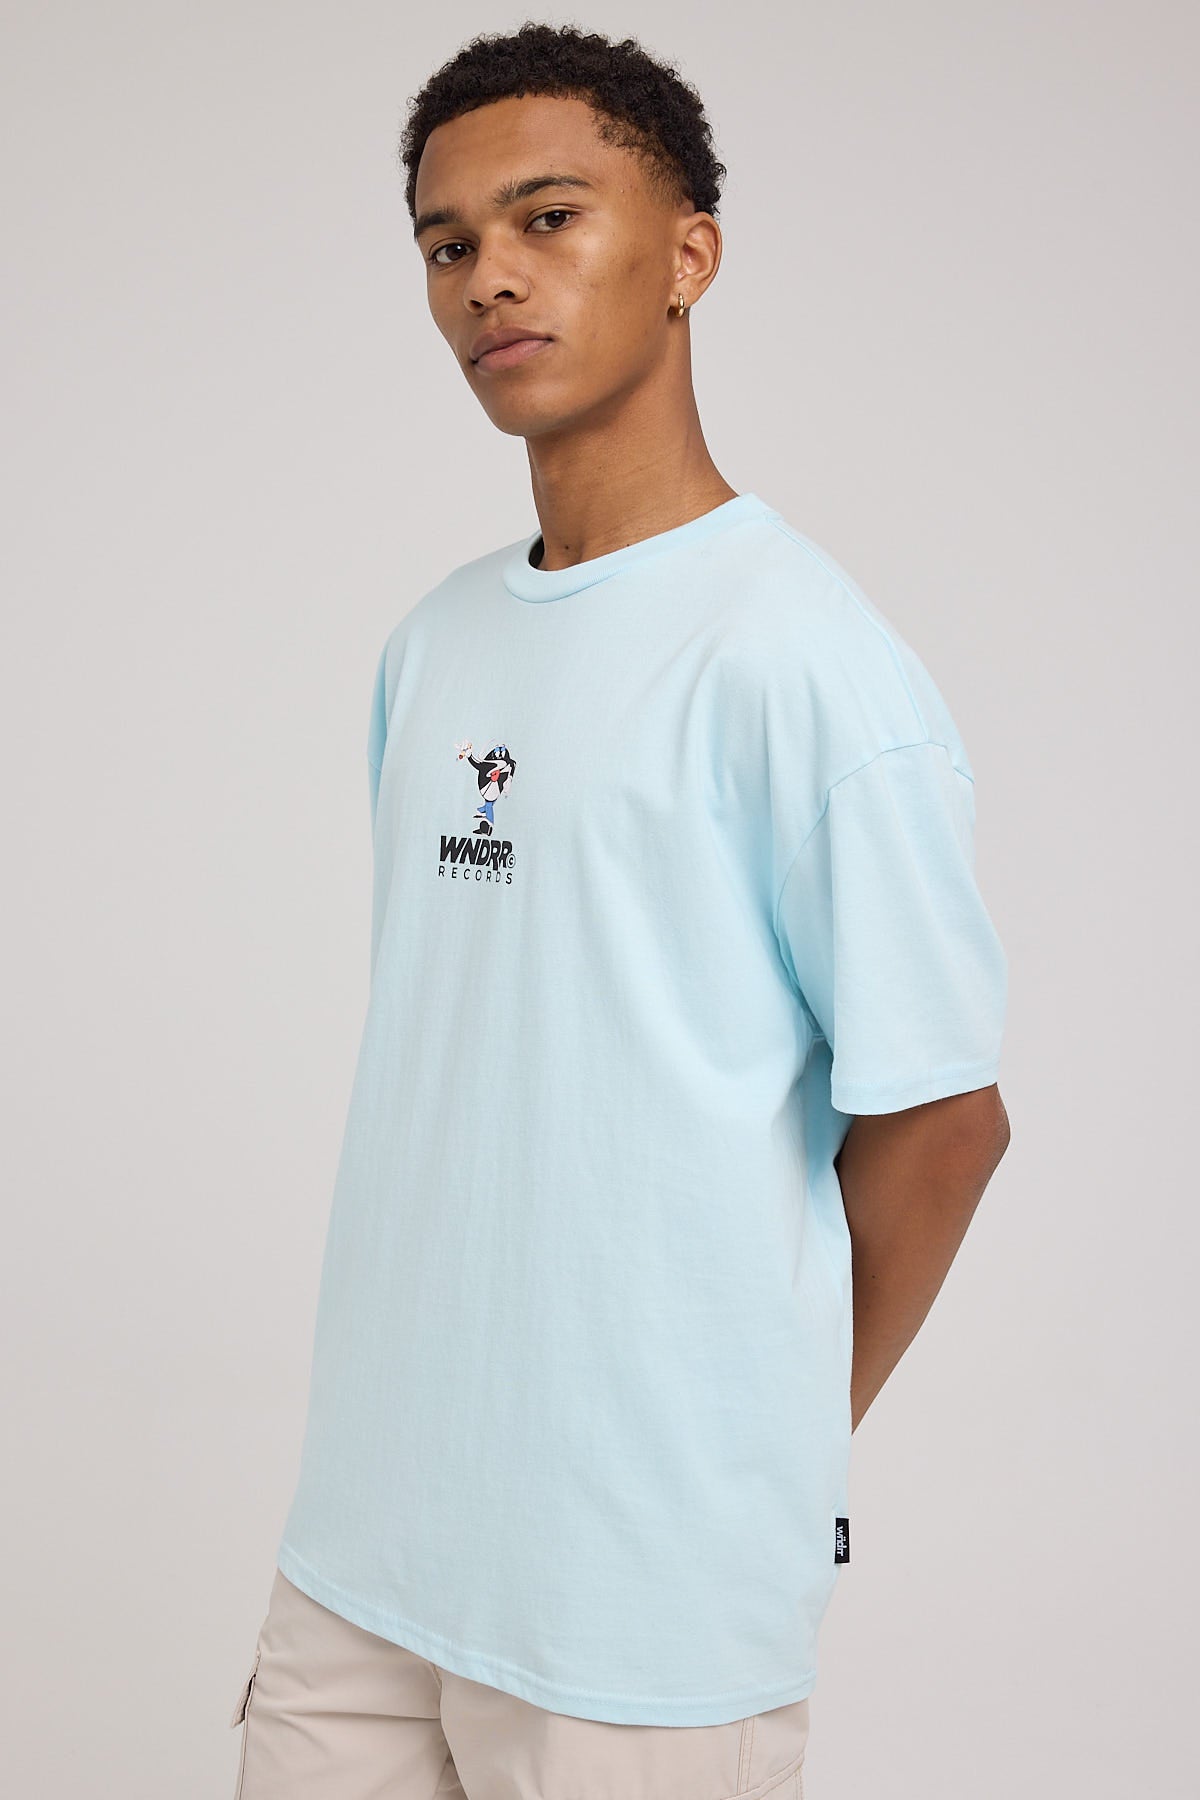 Wndrr Like That Box Fit Tee Baby Blue Baby Blue